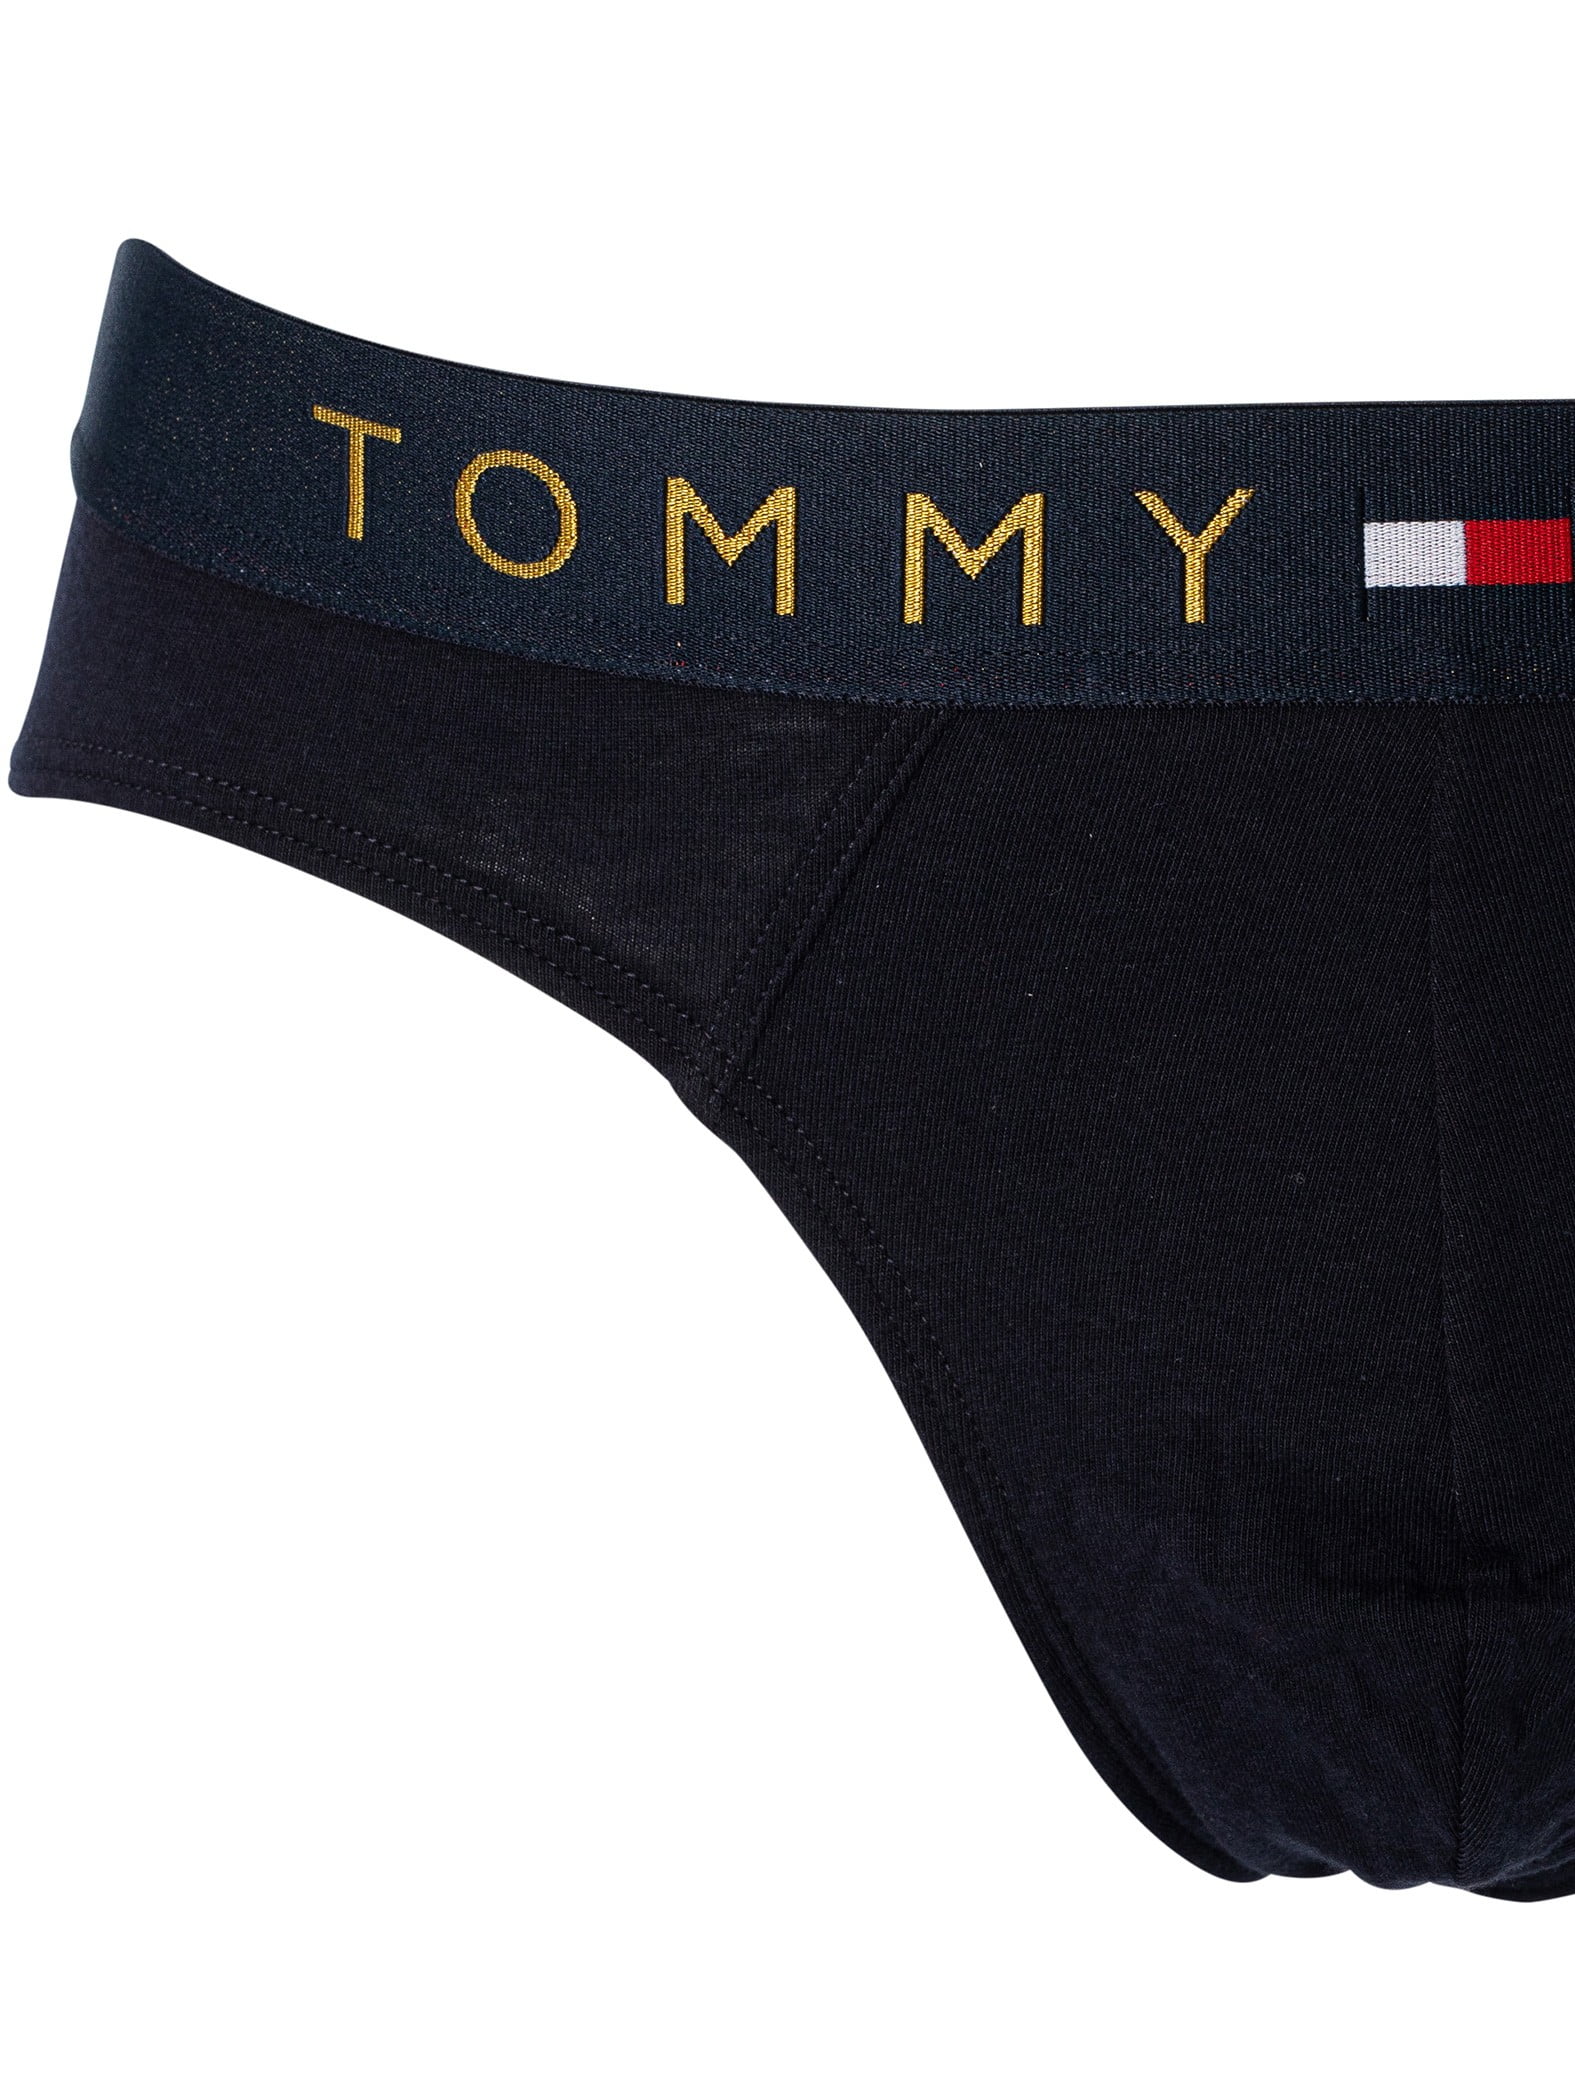 Tommy Hilfiger 5 Pack Gold WB Briefs, Multicoloured